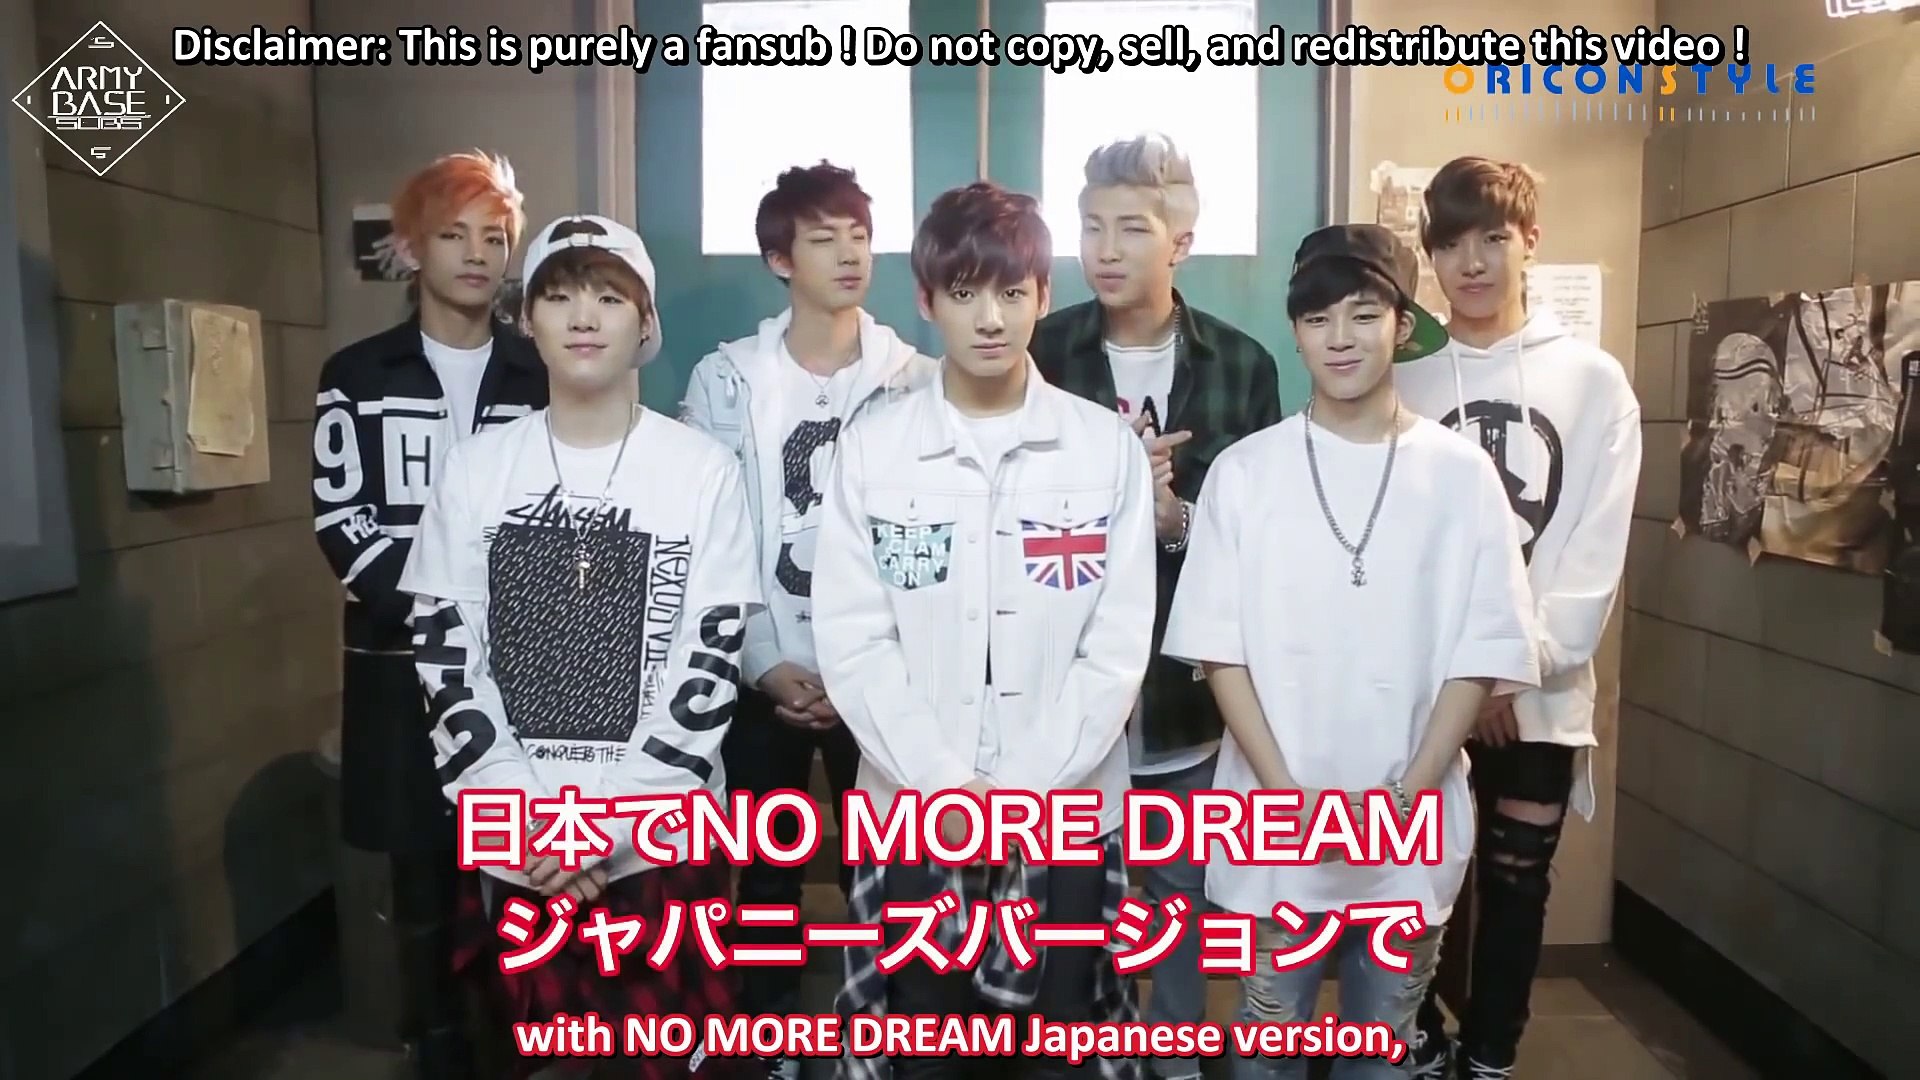 Eng 140610 Bts Oricon Style No More Dream Pv Making Abs Images, Photos, Reviews